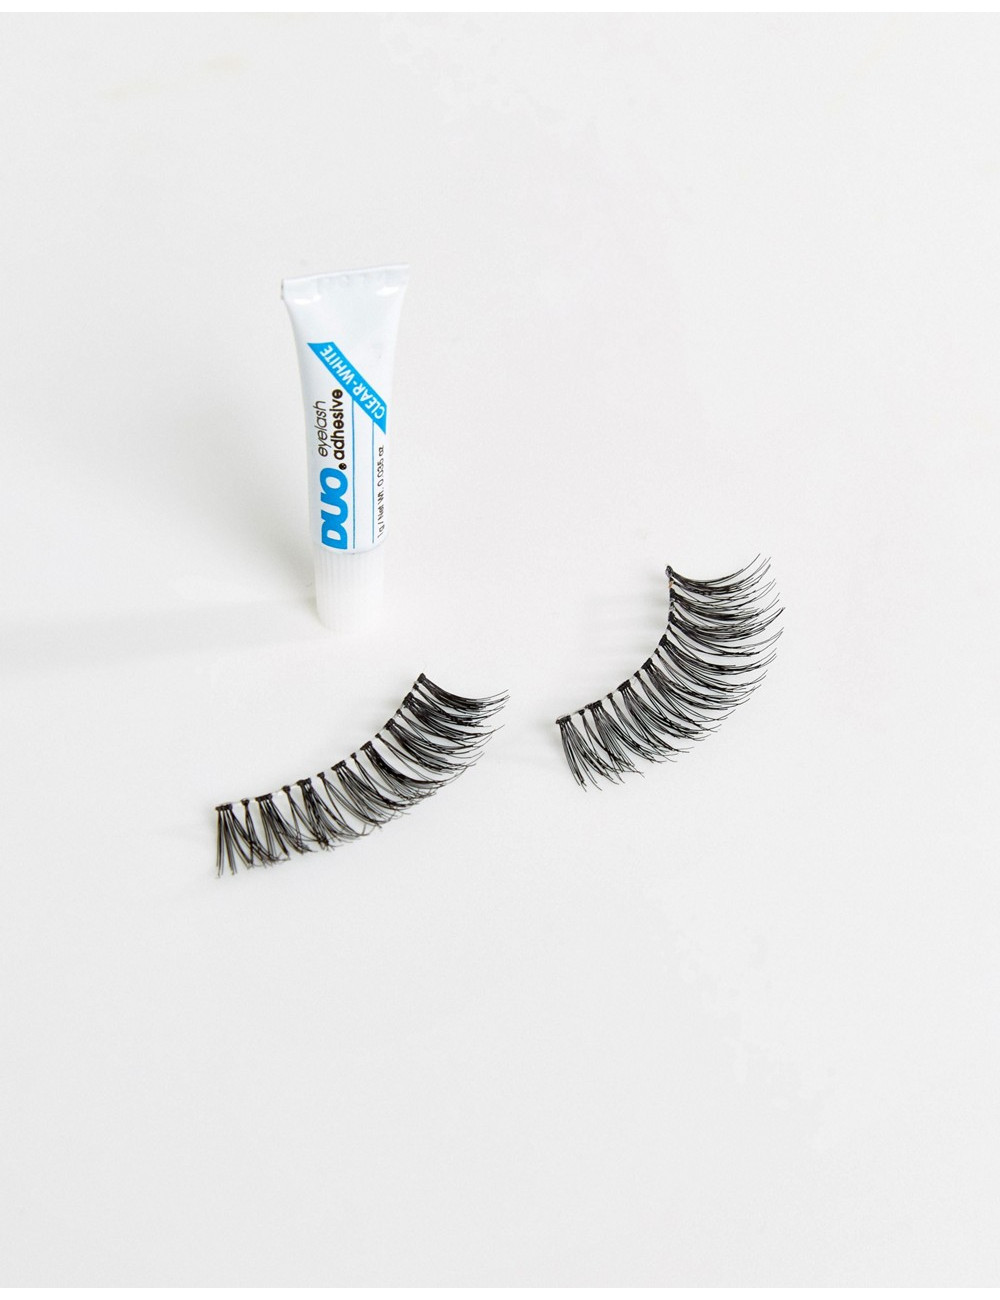 Ardell Lashes Wispies